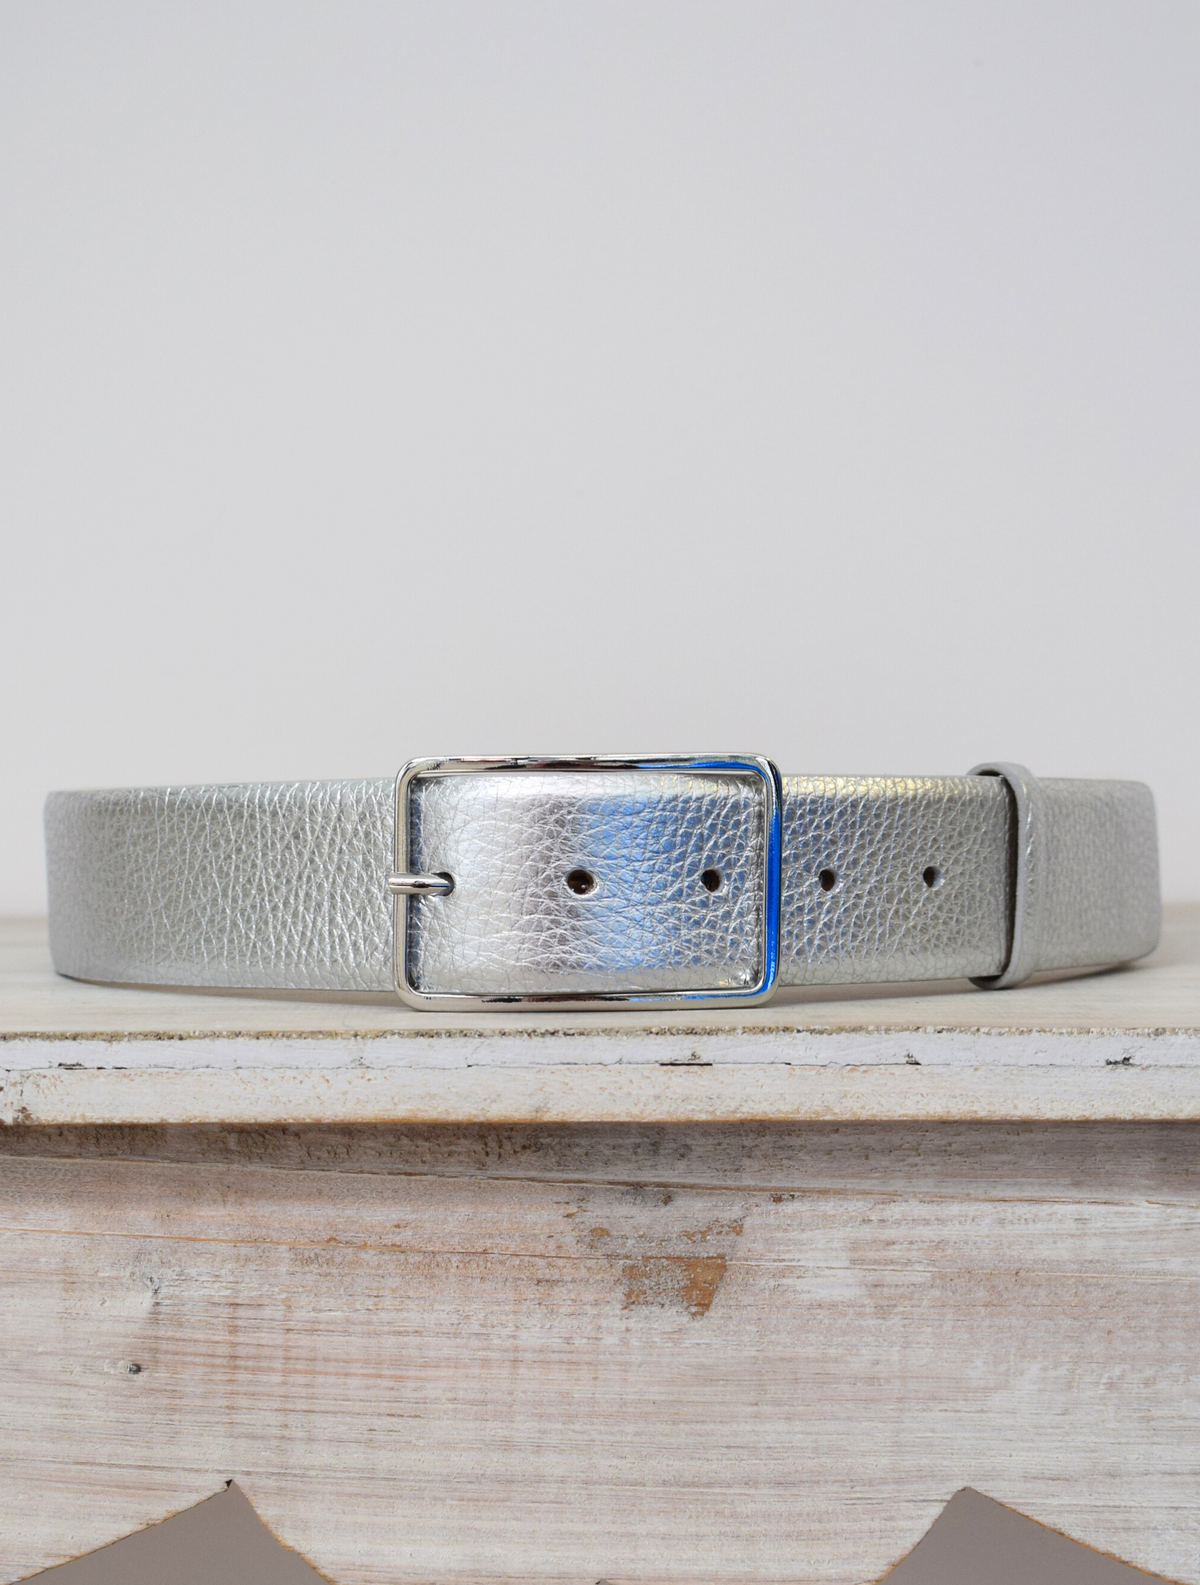 Silver belt with thin silver buckle